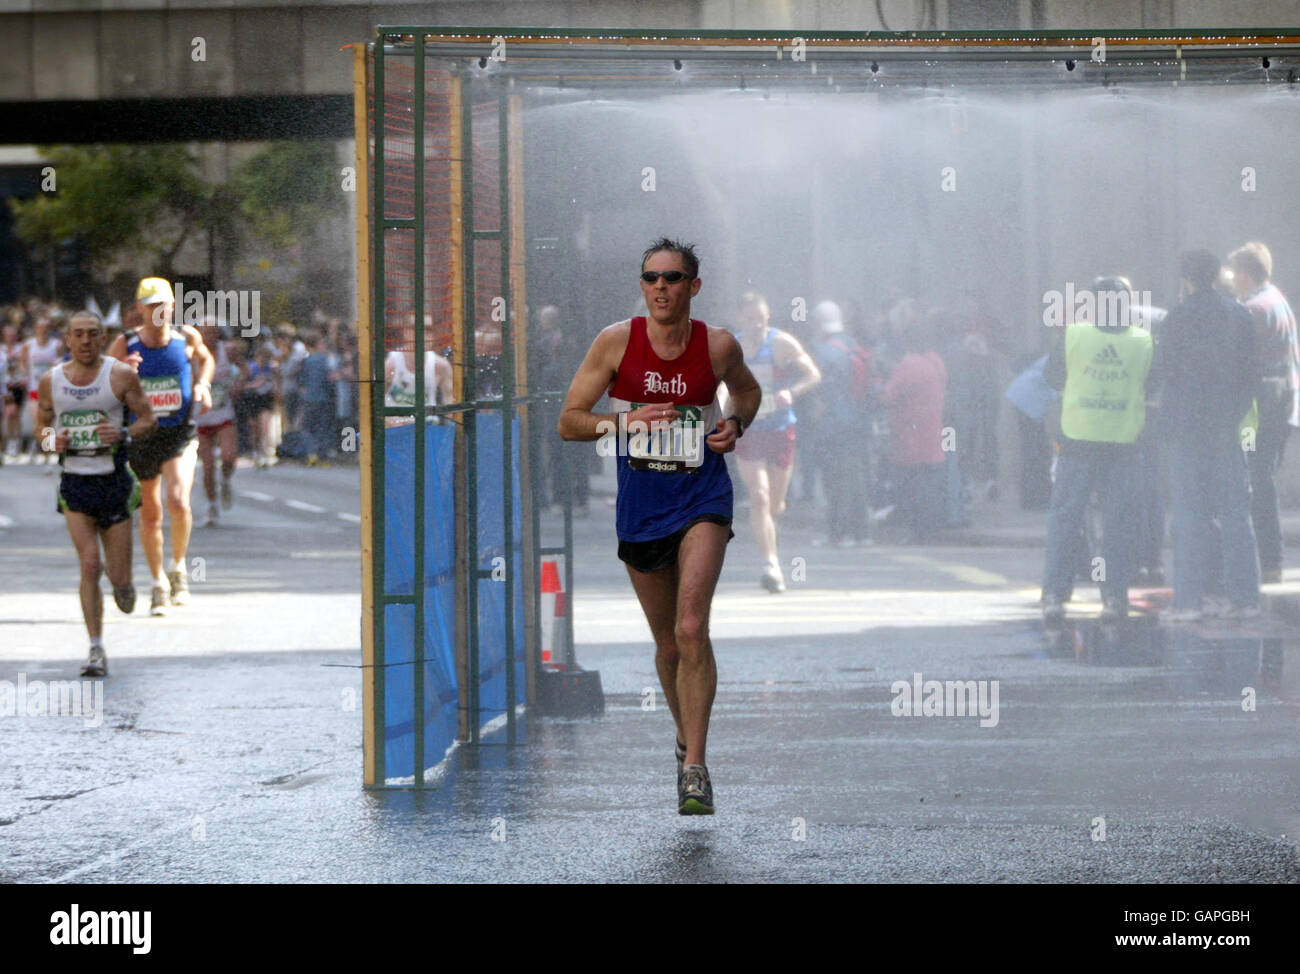 A shower is optional for competitors as they run through the City in the London Marathon Stock Photo